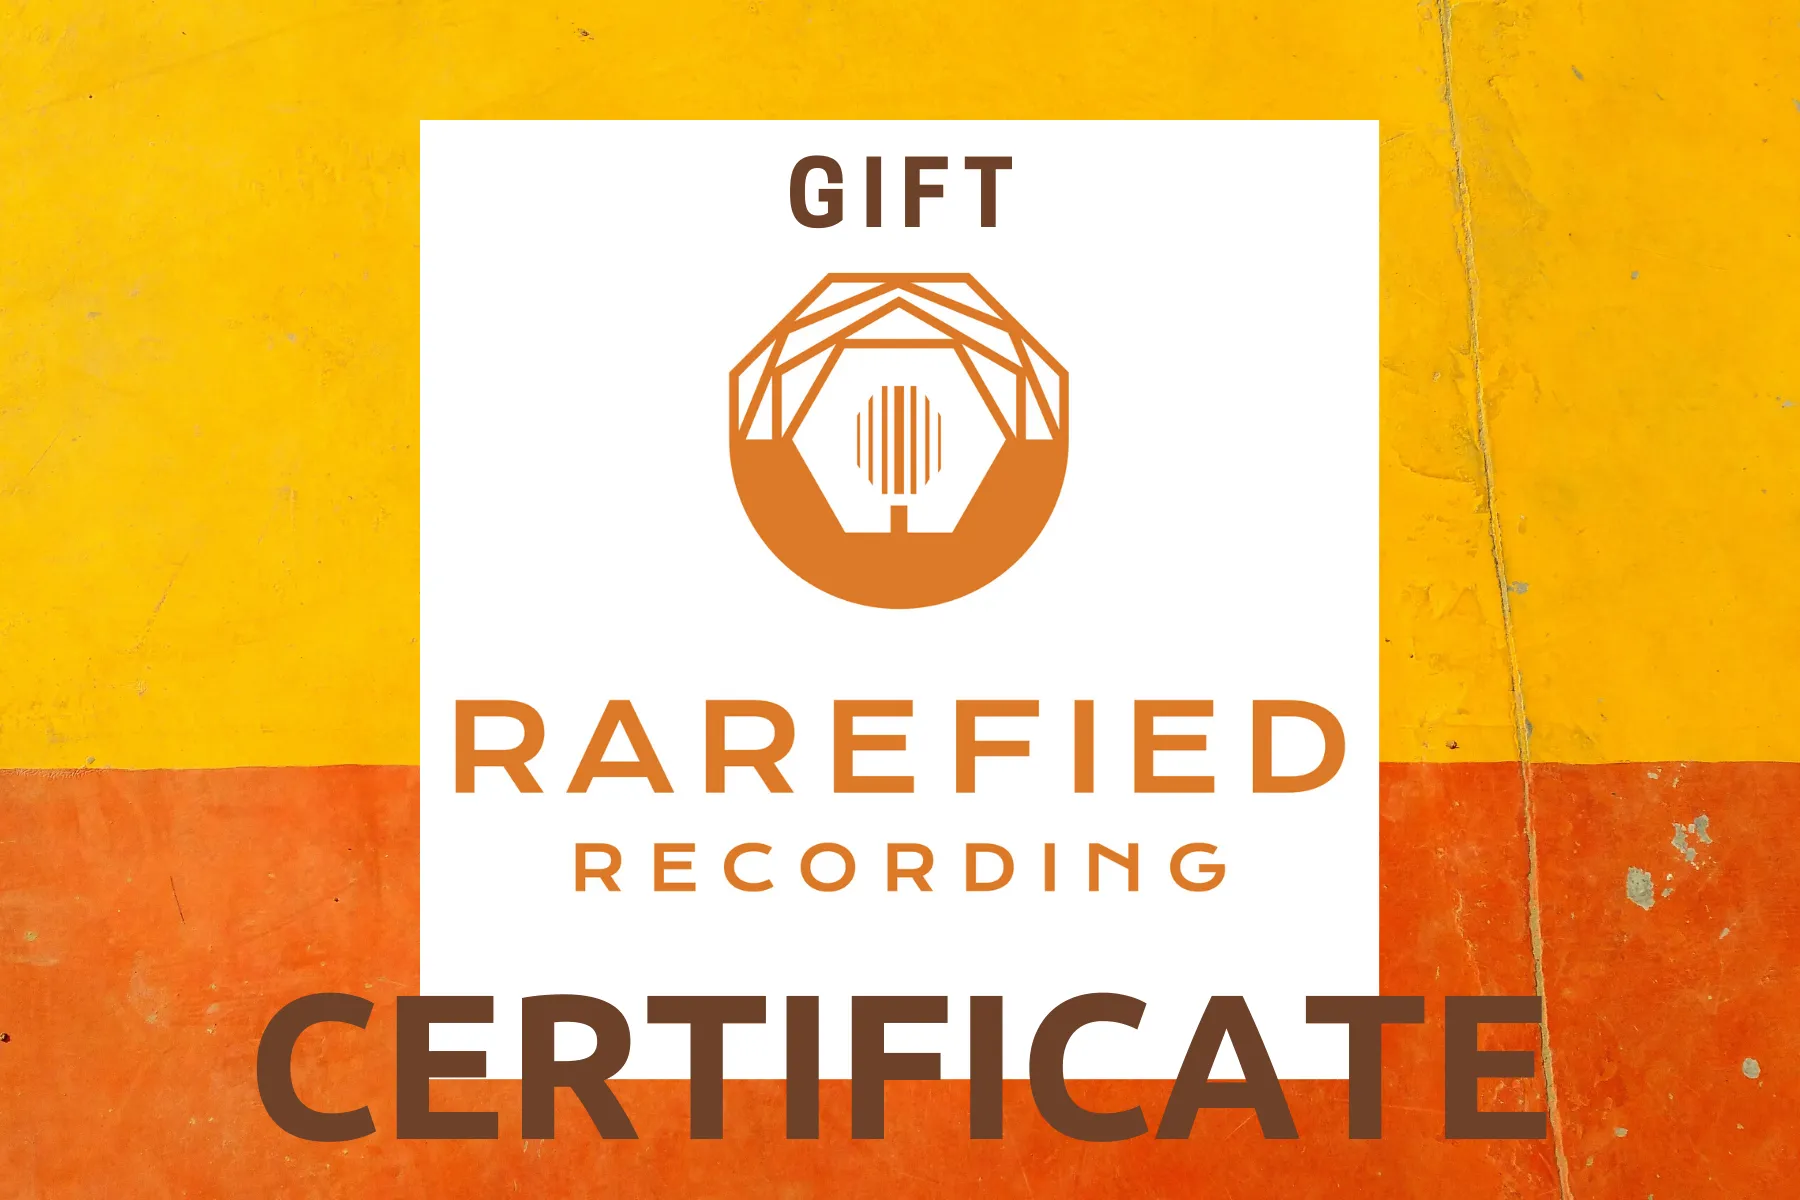 Give the gift of Rarefied!